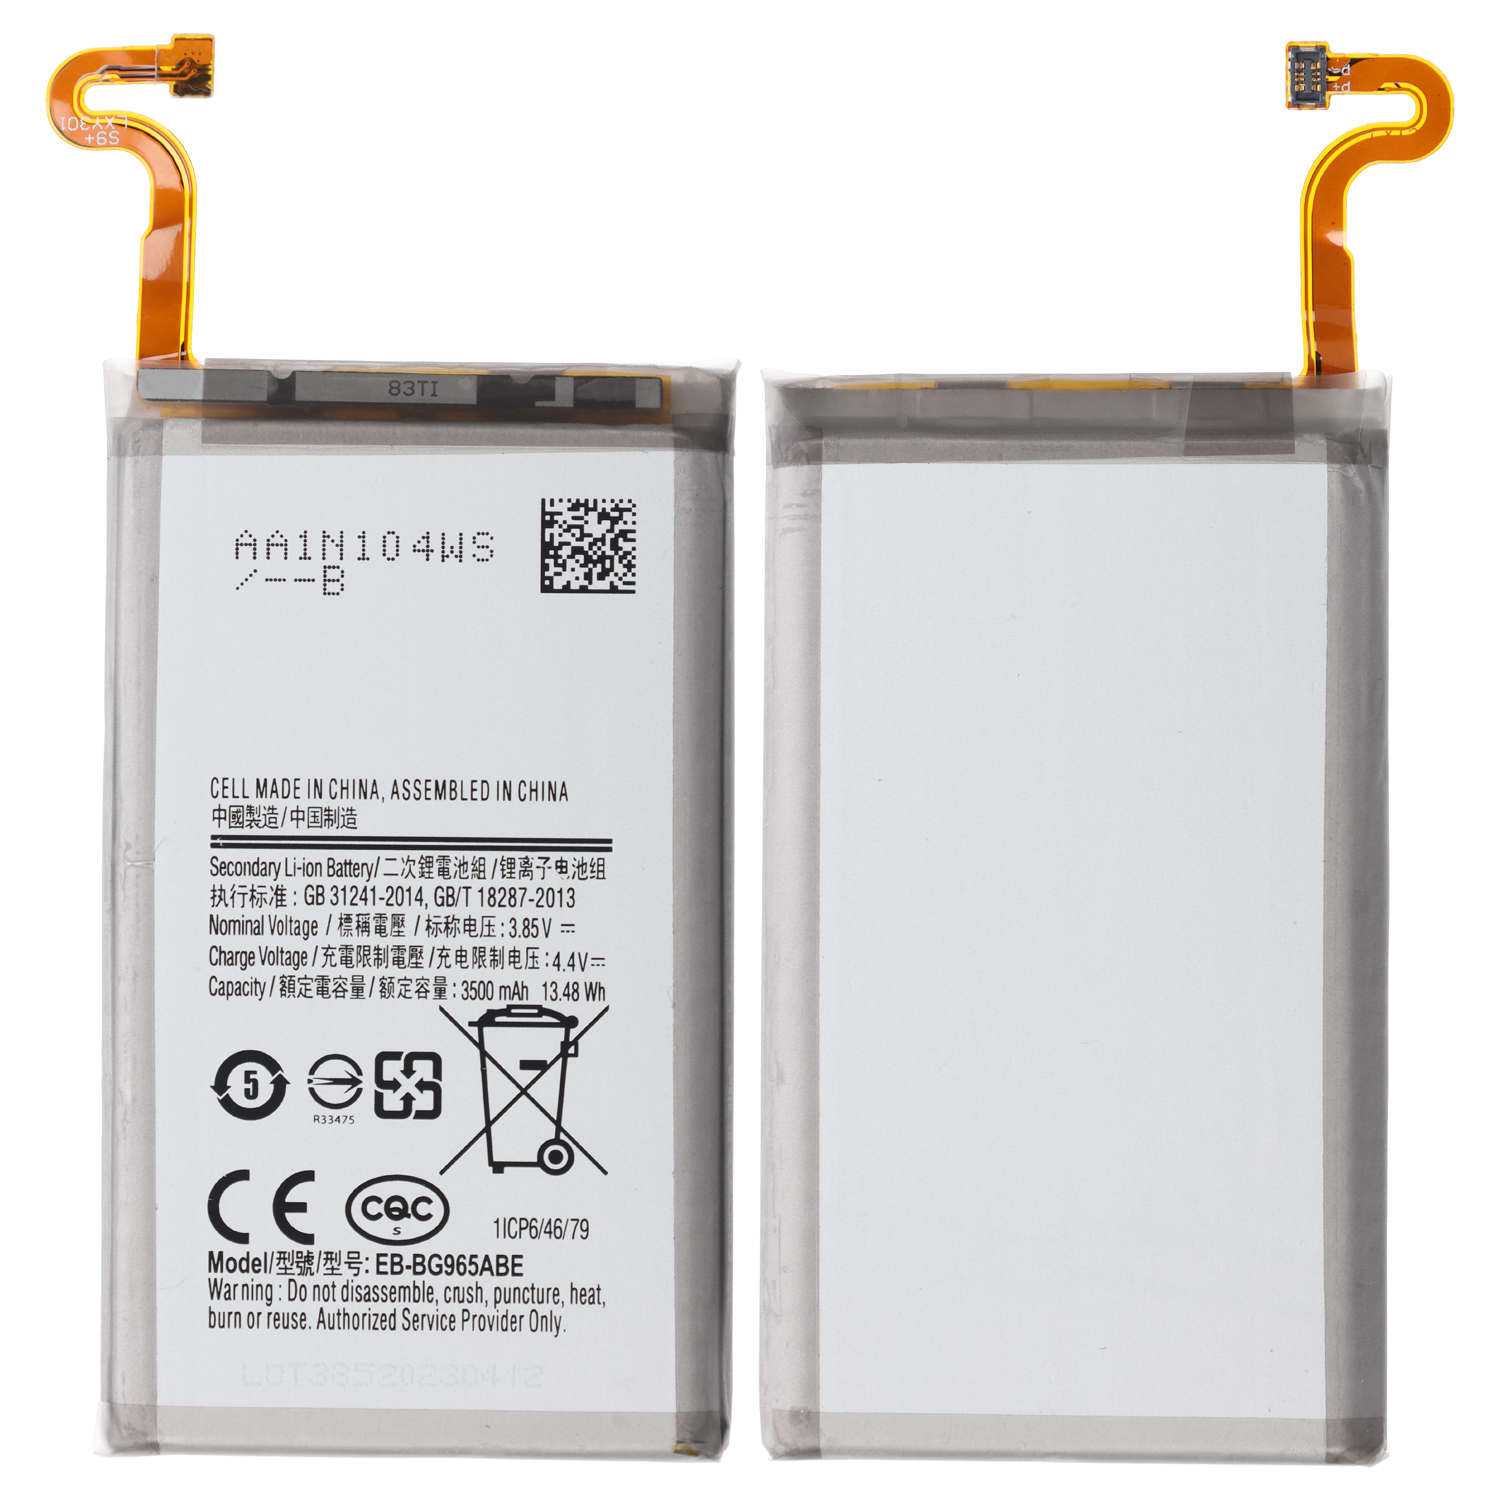 Battery EB-BG965ABE compatible to Samsung Galaxy S9+ / S9+ Duos G965F